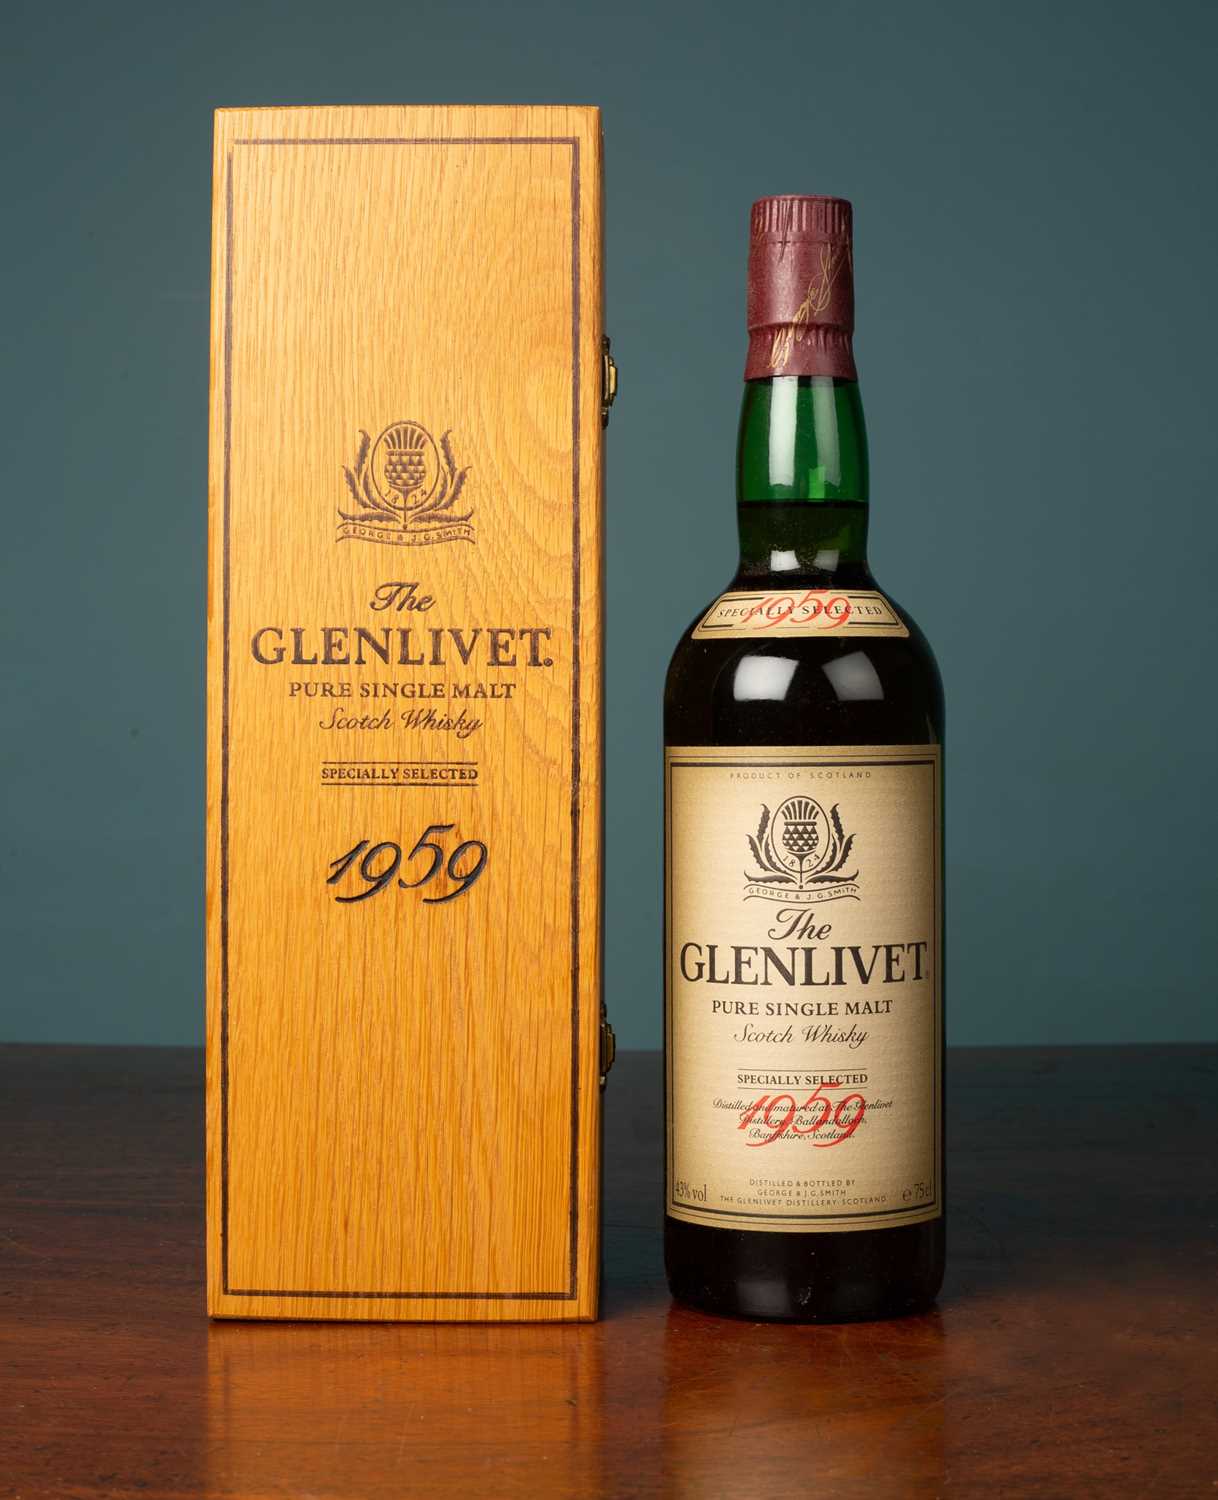 1029 - The Glenlivet Pure Single Malt Scotch Whisky, Specially Selected, 1959